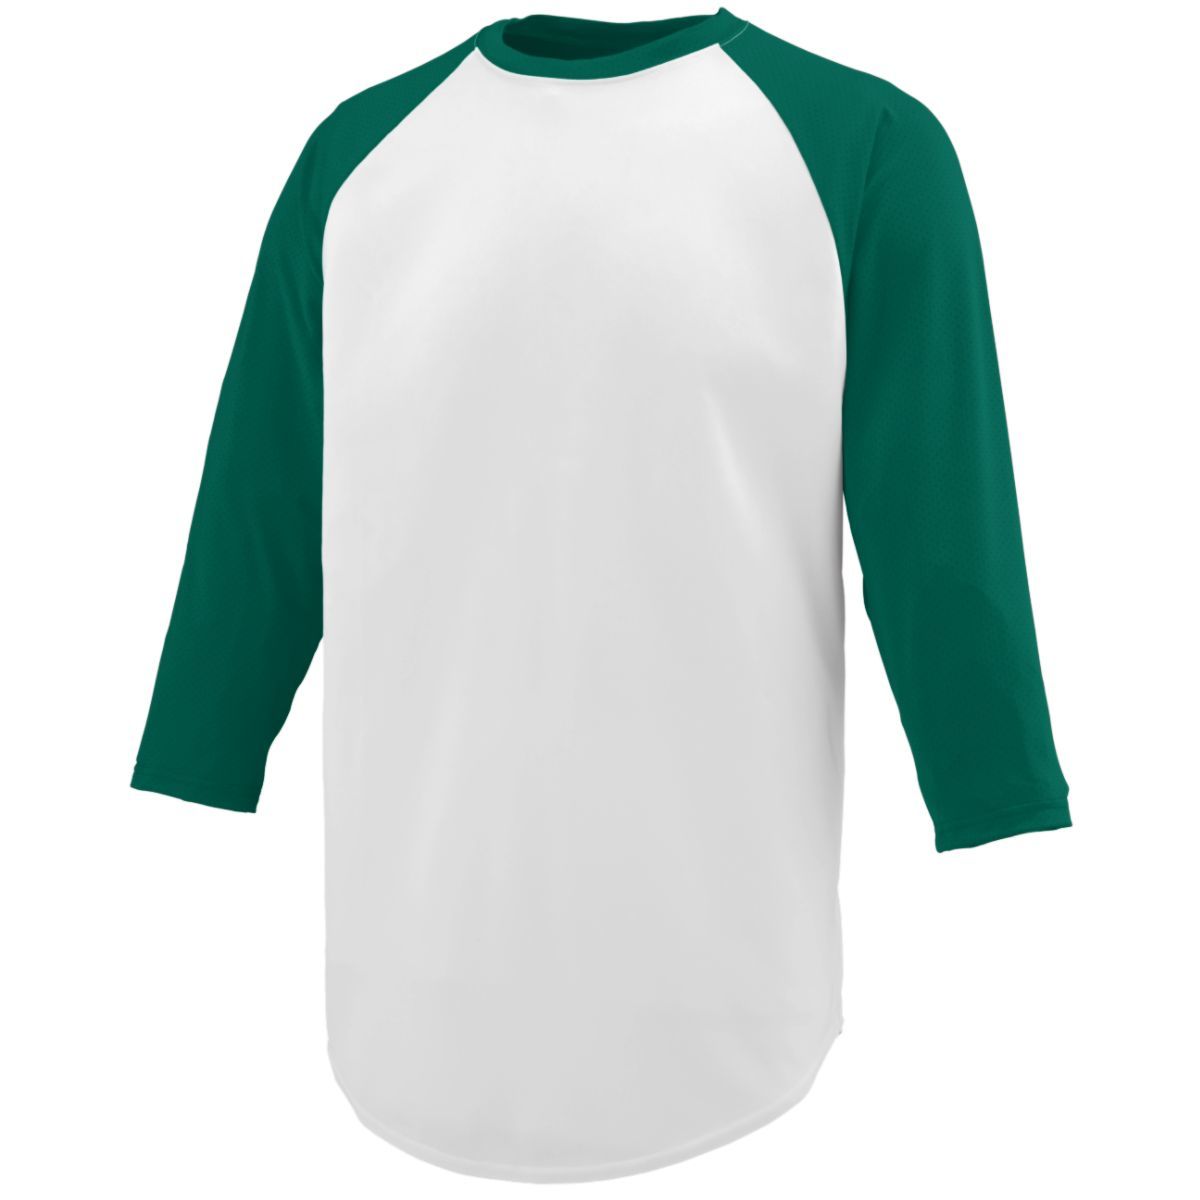 Augusta Sportswear Nova Jersey in White/Dark Green  -Part of the Adult, Adult-Jersey, Augusta-Products, Baseball, Shirts, All-Sports, All-Sports-1 product lines at KanaleyCreations.com